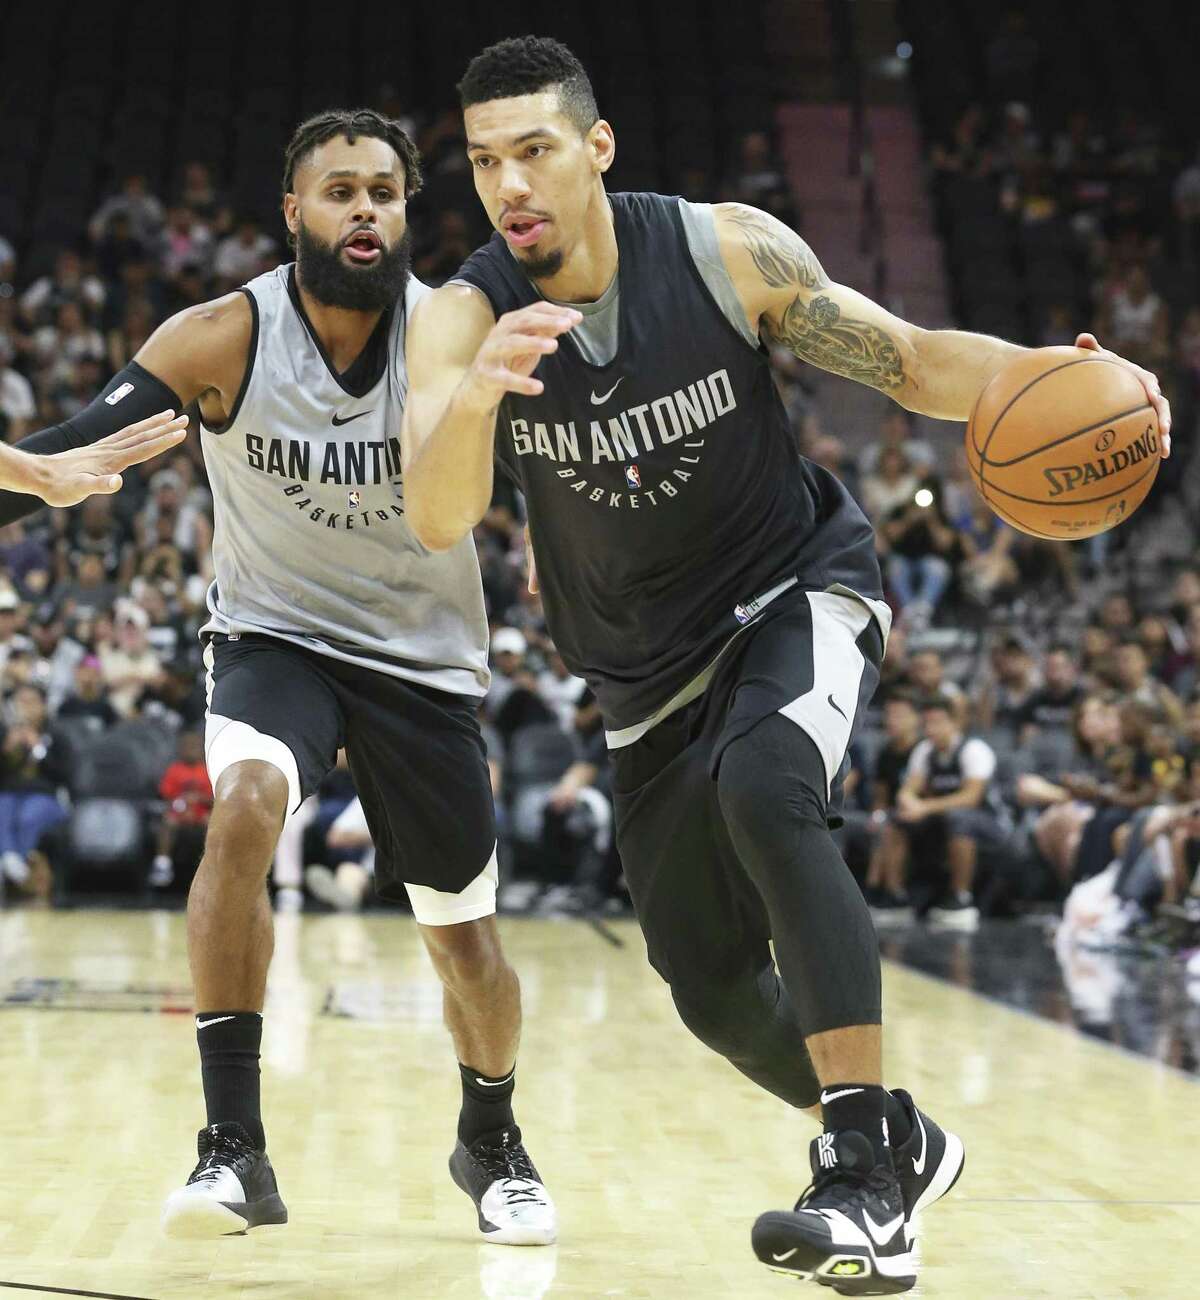 Danny Green gets away from Patty Mills as the Spurs Silver and Black intrasquad scrimmage at the AT&T Center on September 30, 2017.